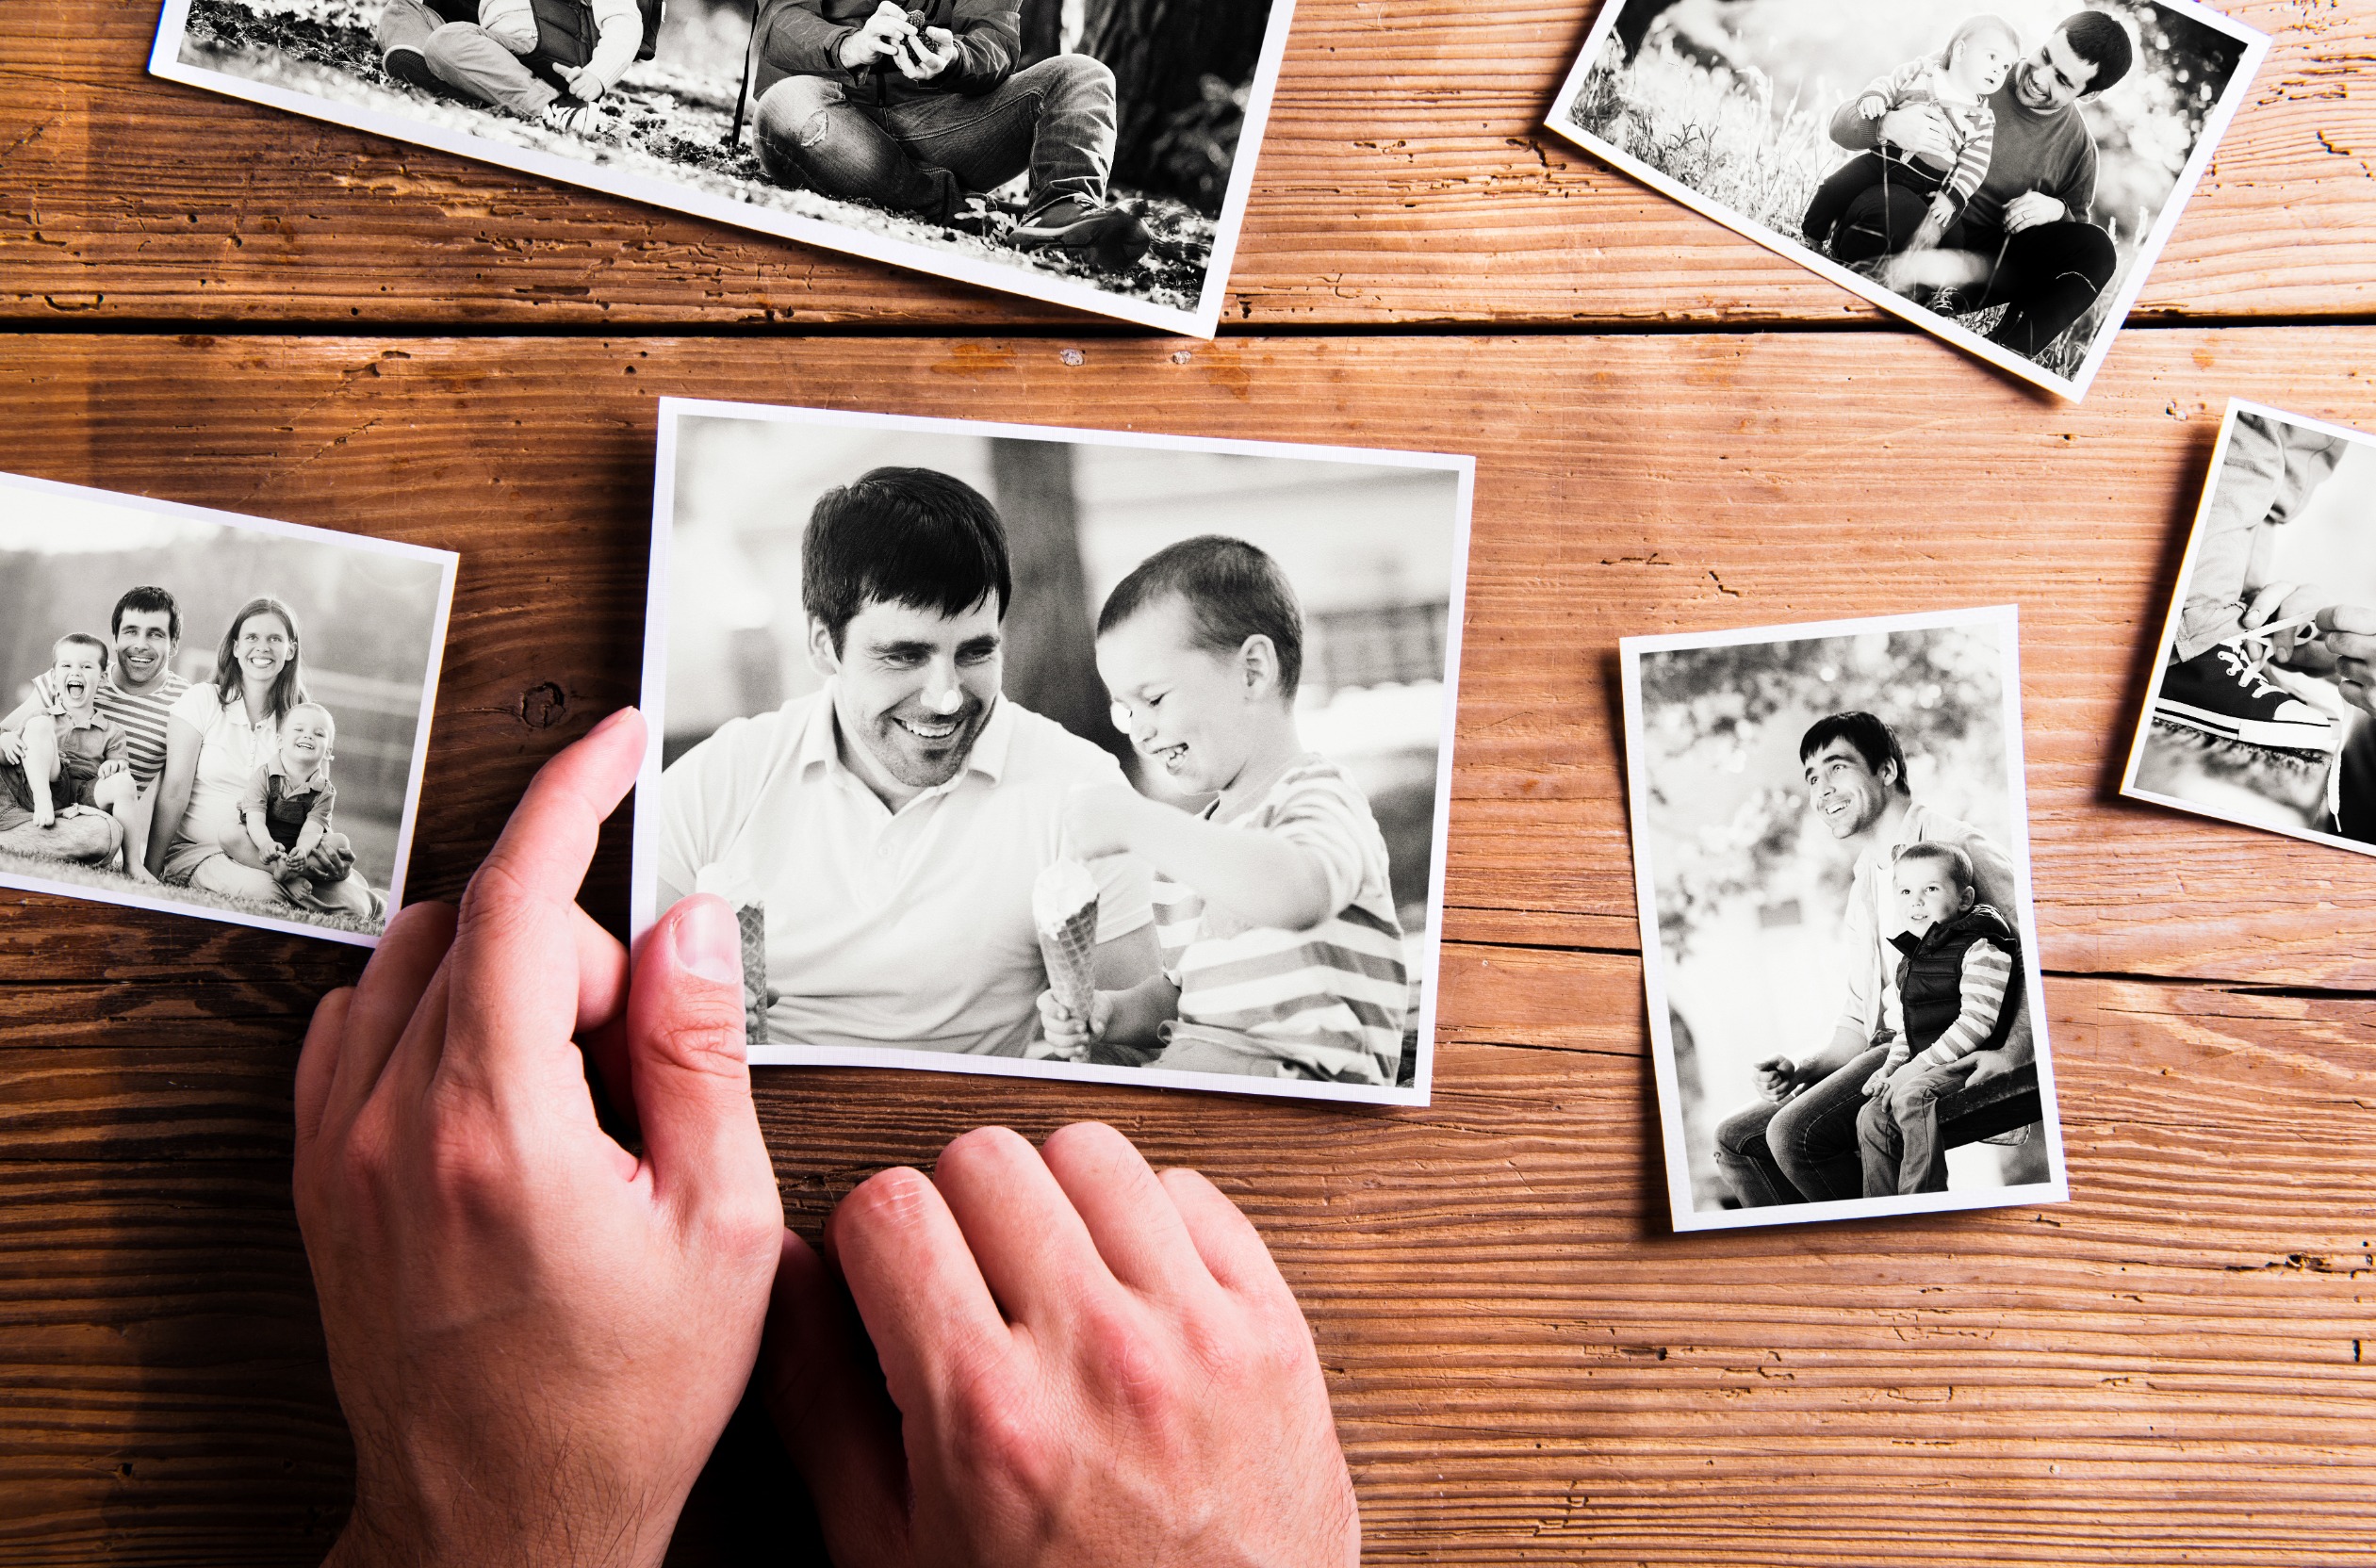 Handy Guide to Sort and Organise Your Old Printed Photos in 5 Easy Steps